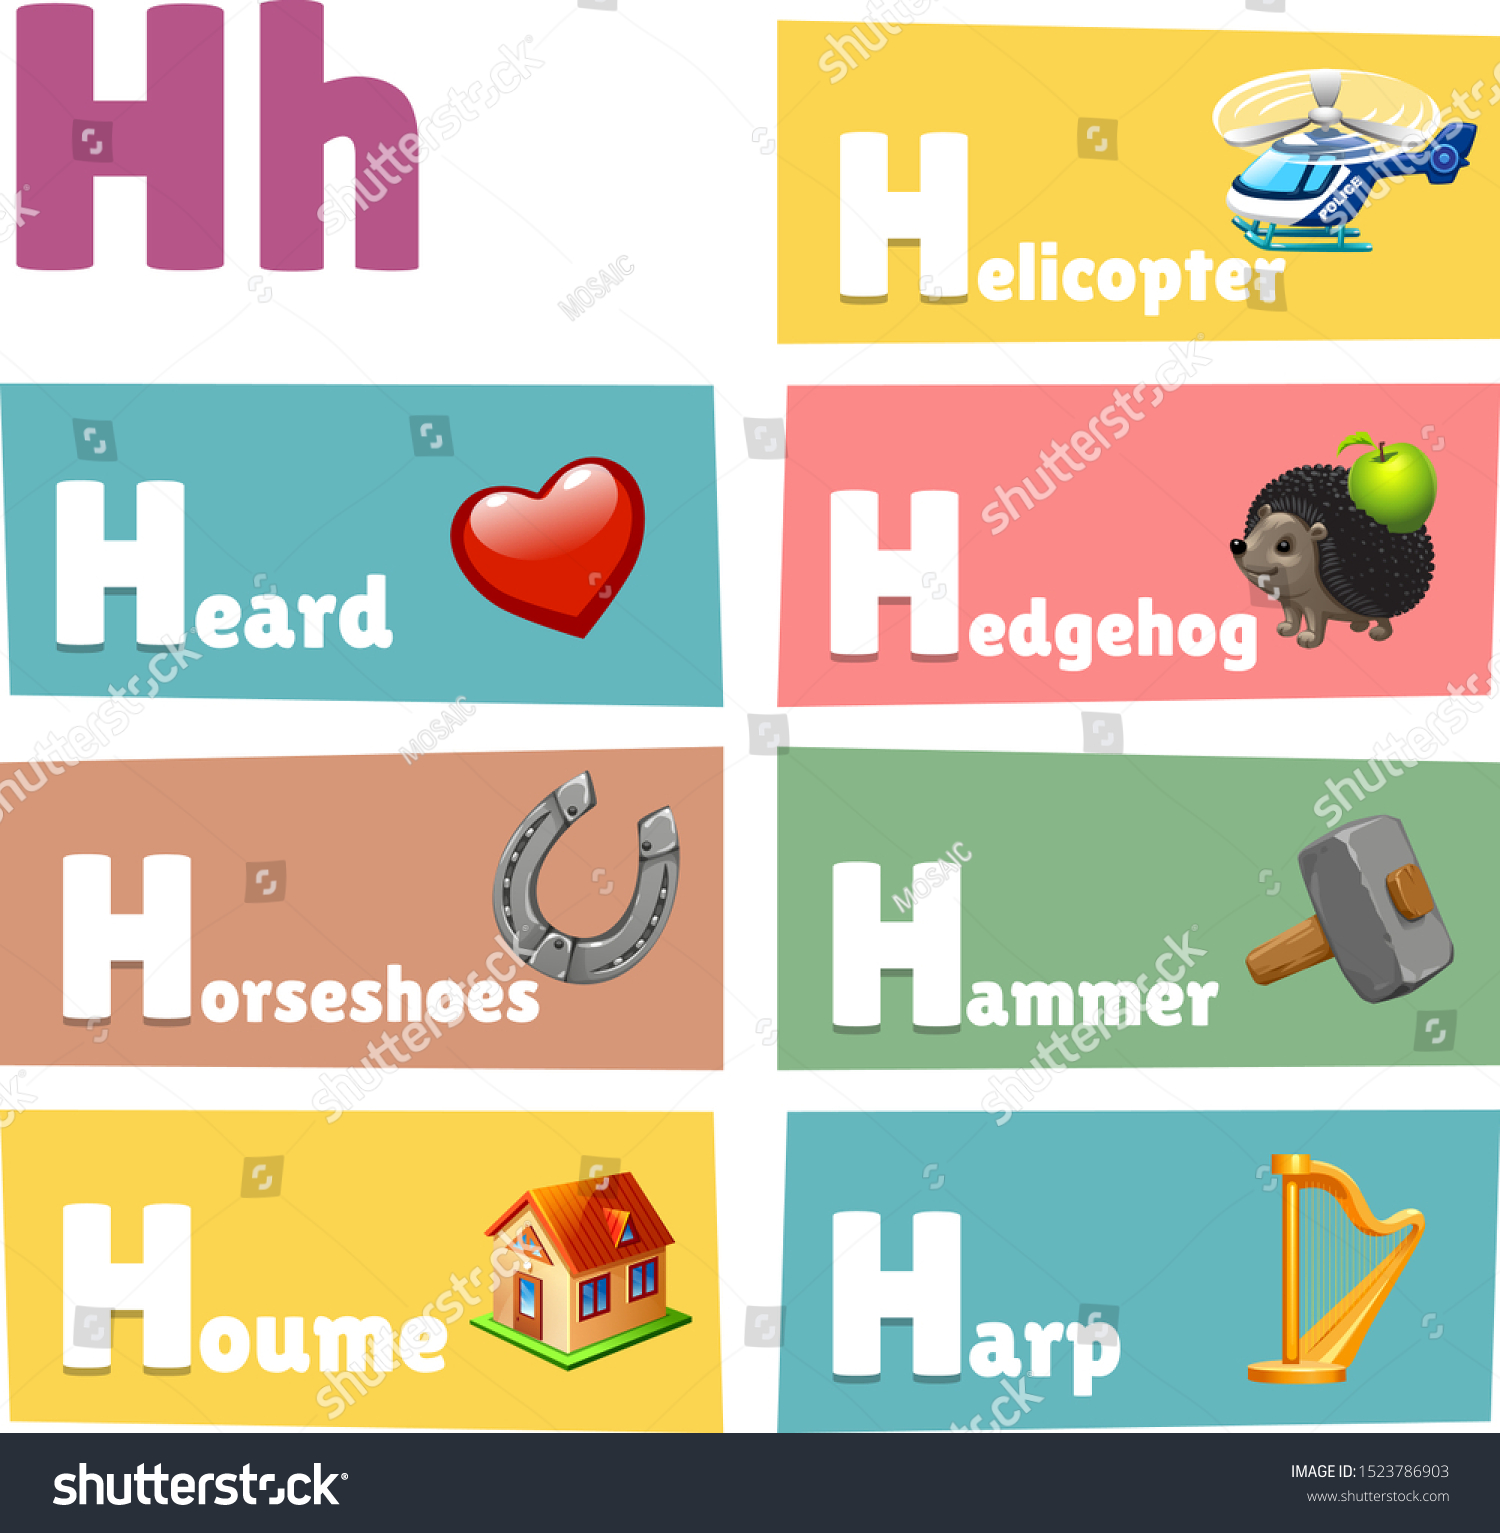 H Alphabet Words With Pictures / Help your child learn alphabets and ...